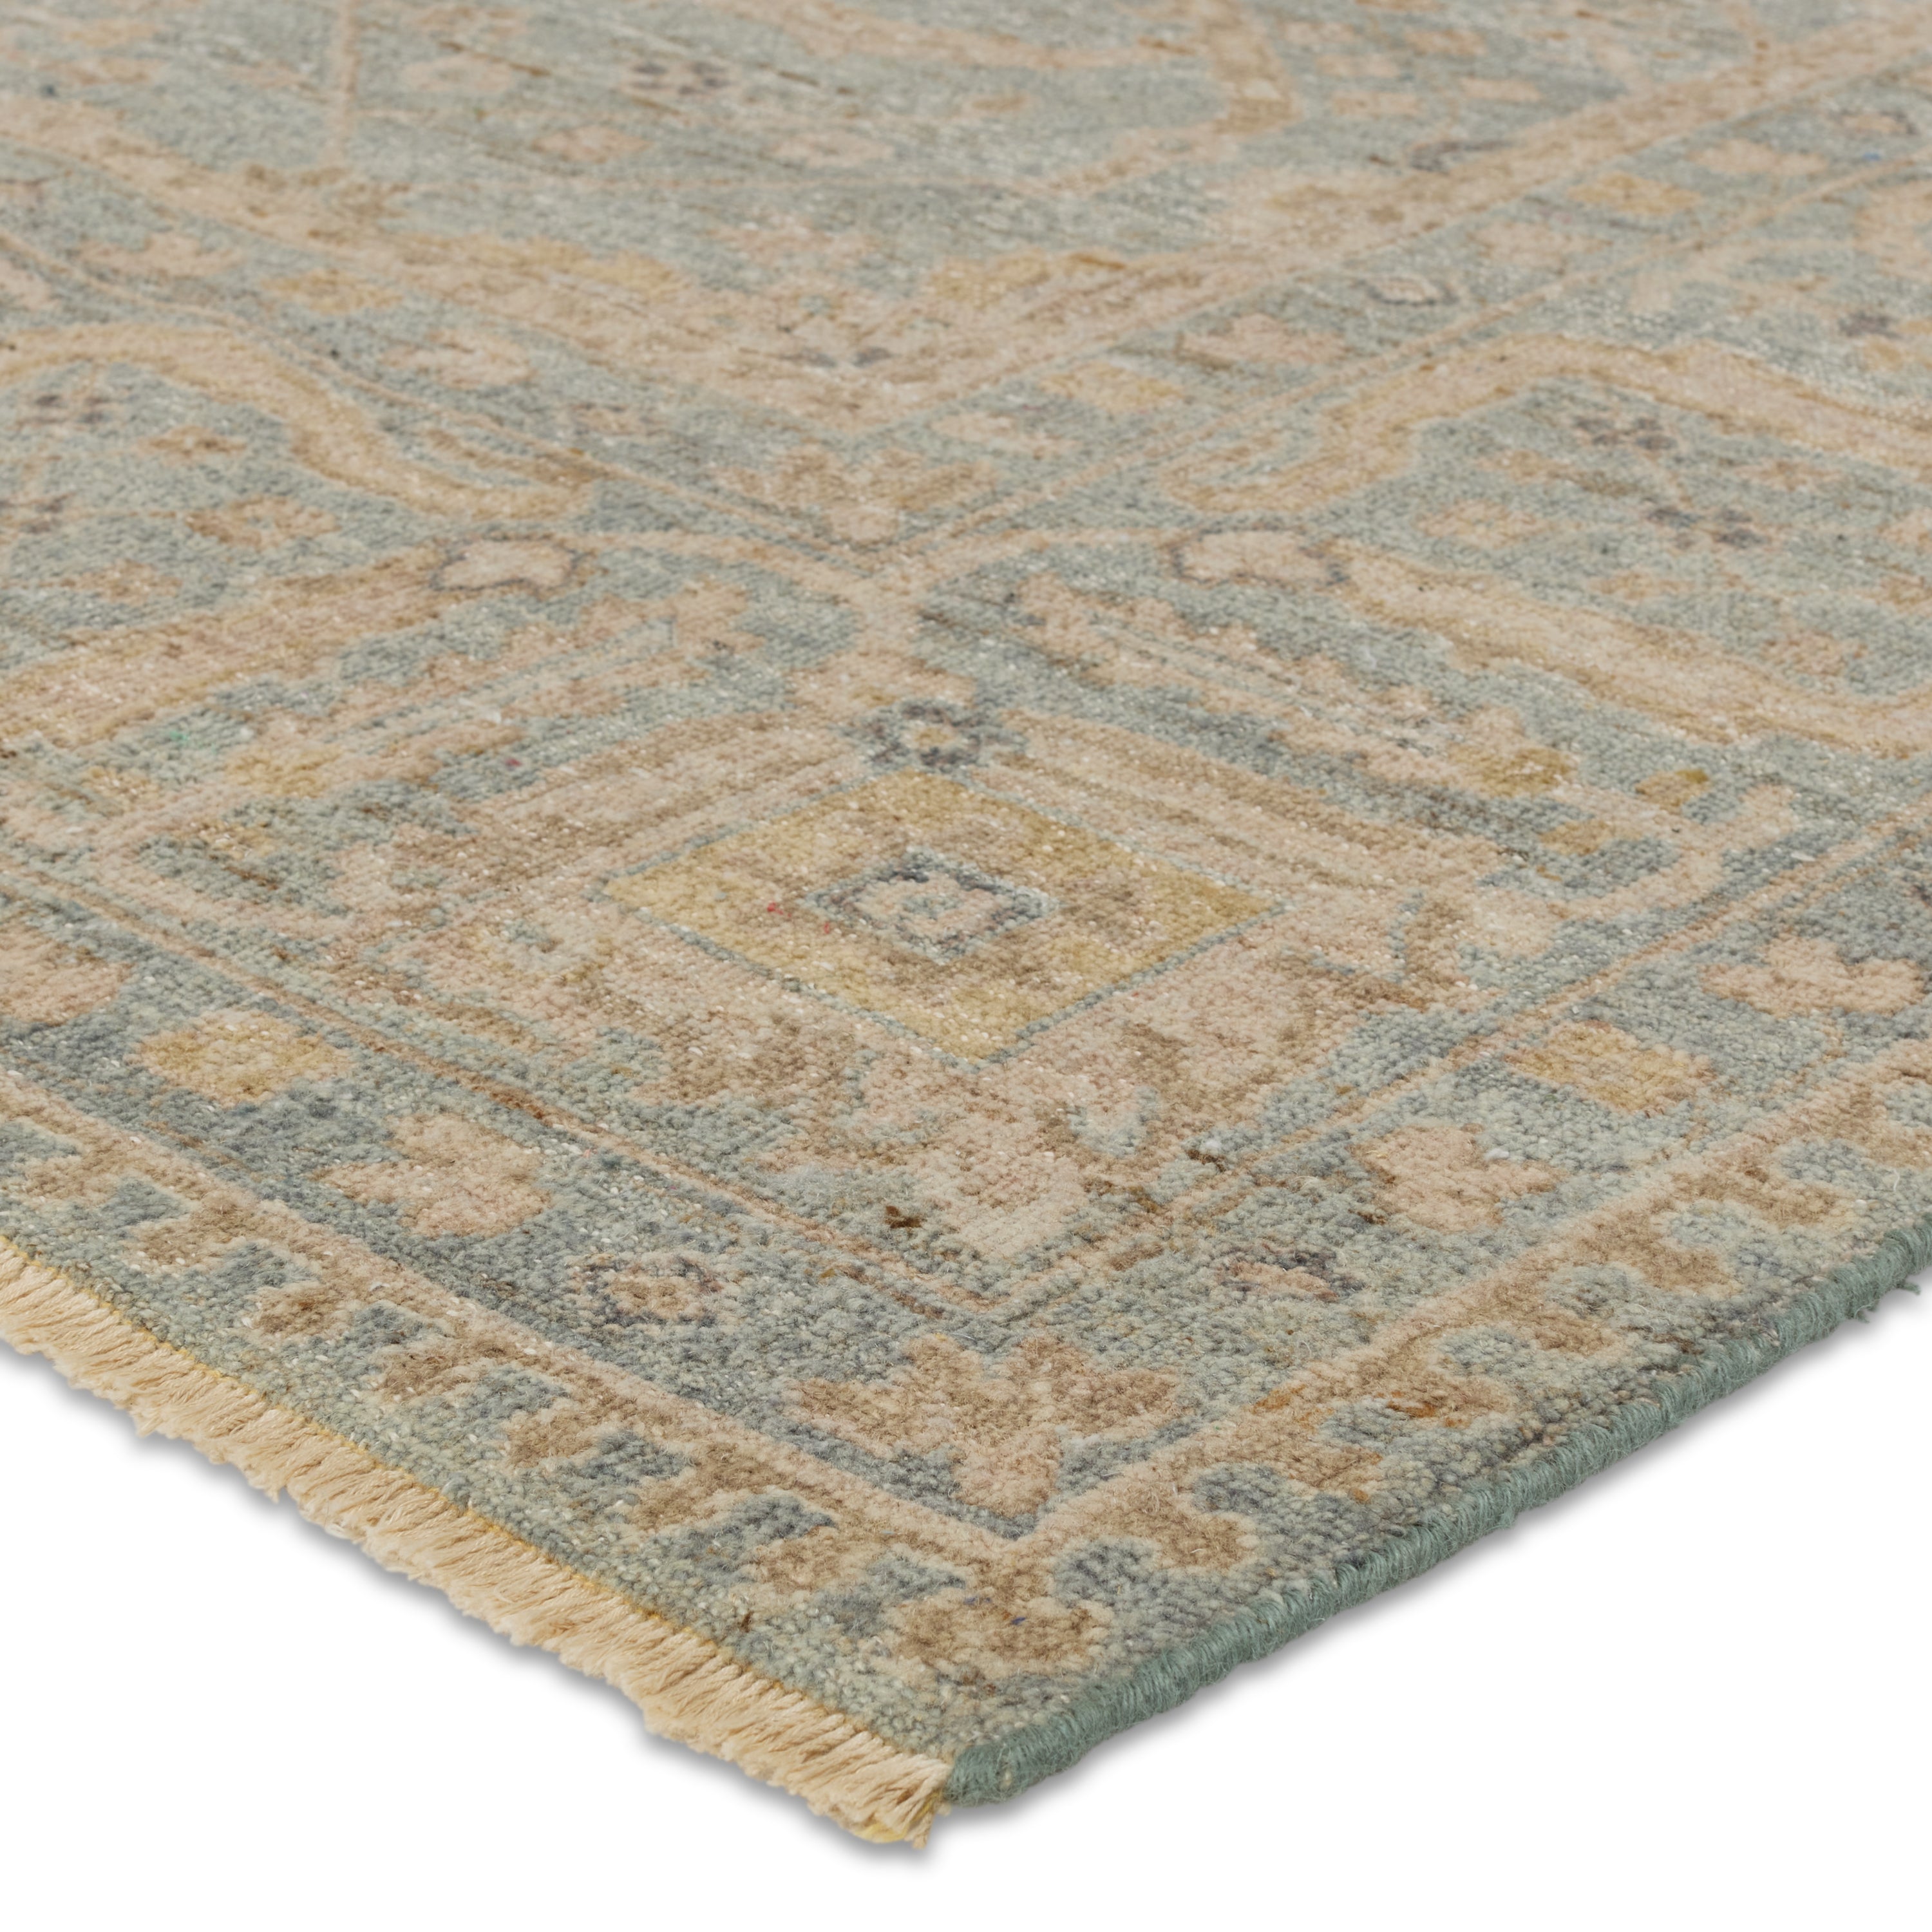 The vintage-inspired Tierzah collection features an antiqued wash and intricate traditional designs. The Maison wool rug boasts a Persian knot construction and tonal gray, tan, muted gold, and gray that grounds any space. This artisan-made rug features fringe trimmed details for a touch of global charm that pair perfectly with the intricate, floral trellis and border pattern. Amethyst Home provides interior design, new construction, custom furniture, and area rugs in the Washington metro area.